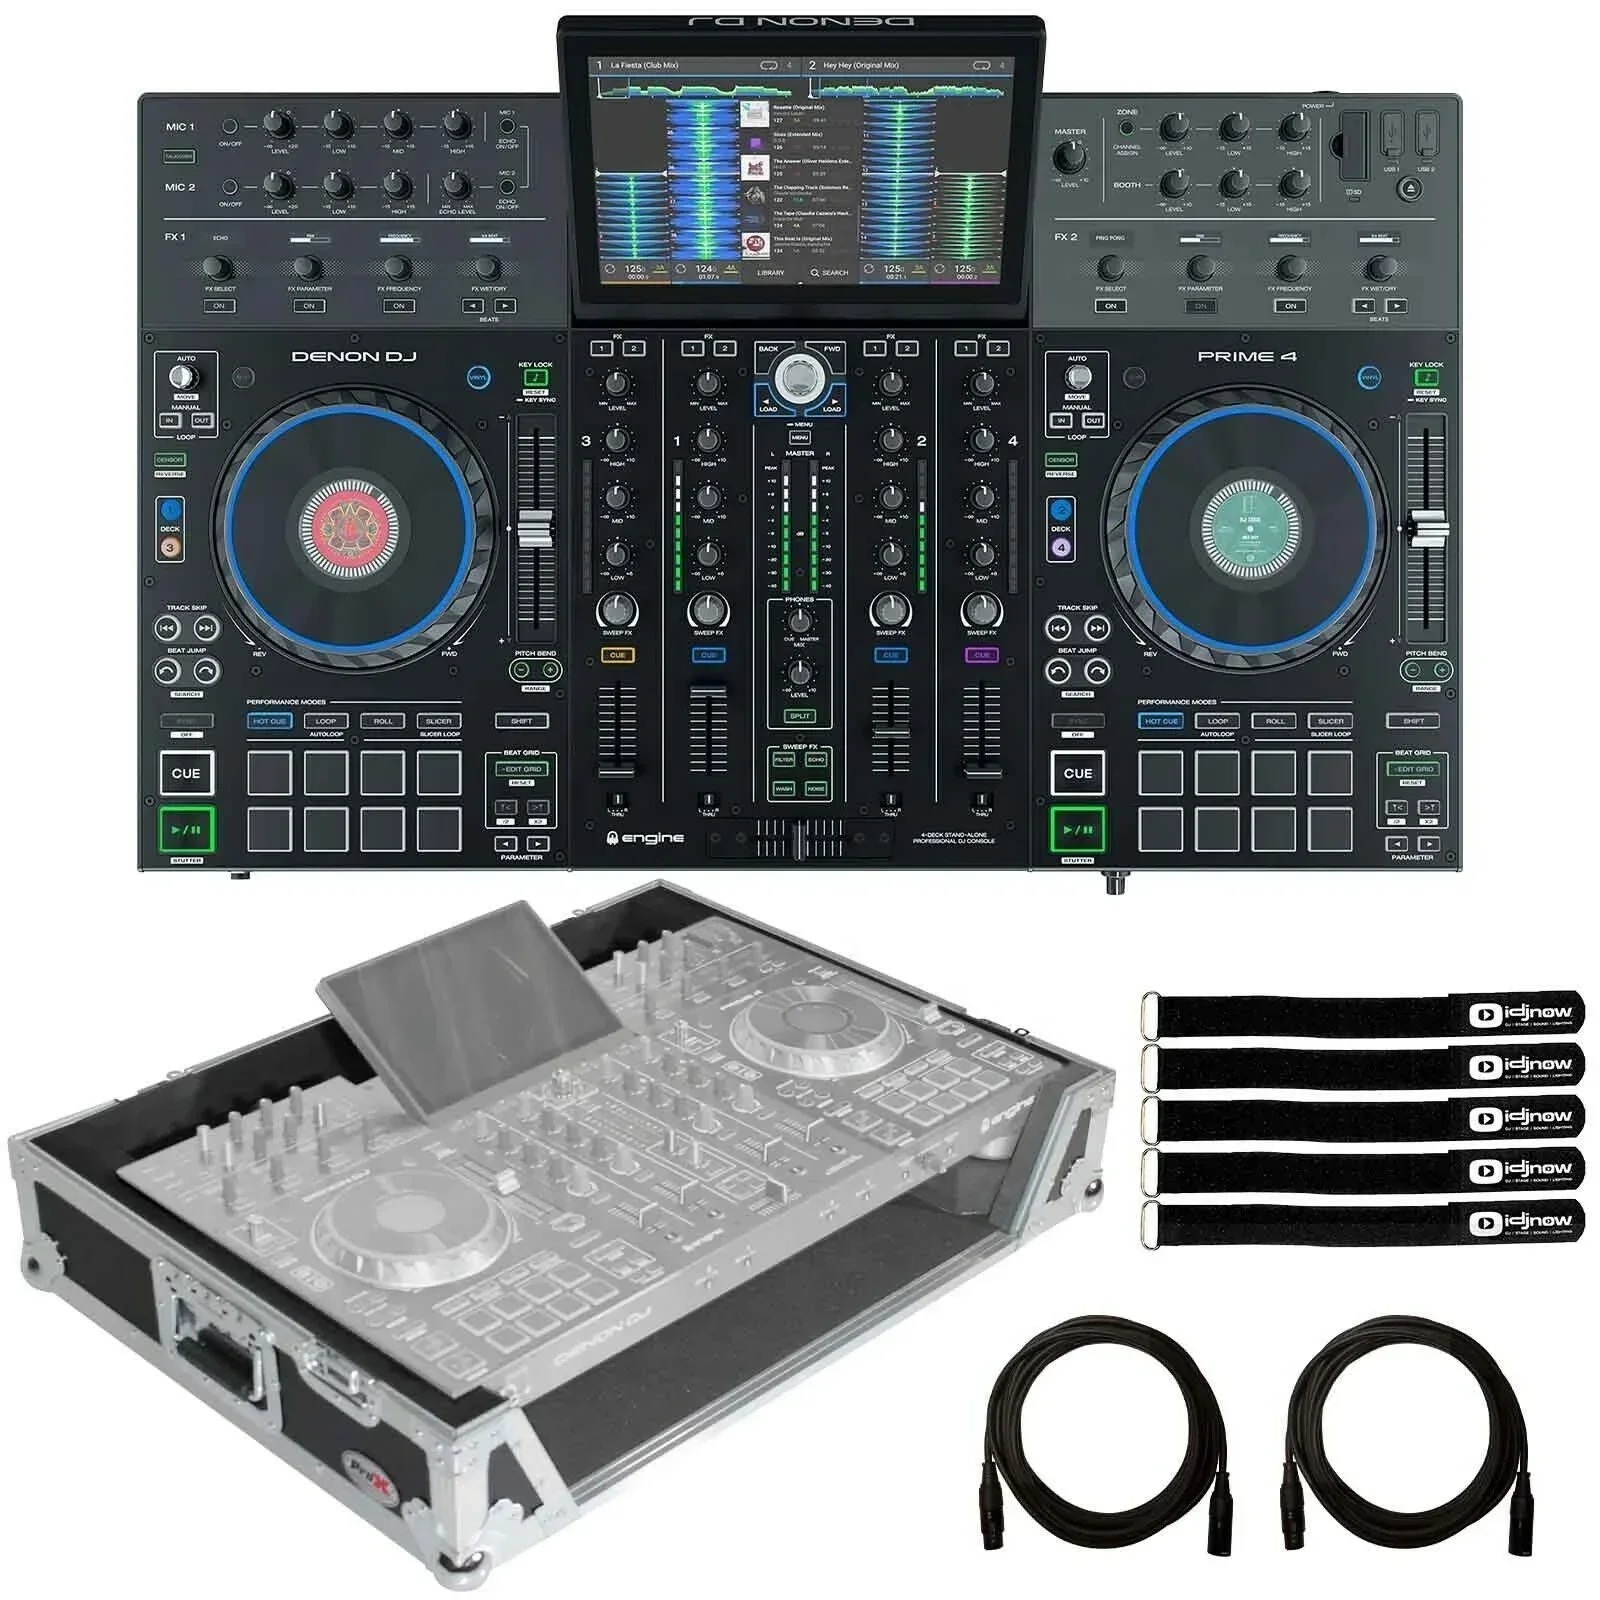 

SUMMER SALES DISCOUNT ON Buy With Confidence New Denon Prime 4 4-Deck Standalone DJ Controller System w 10" Touchscreen